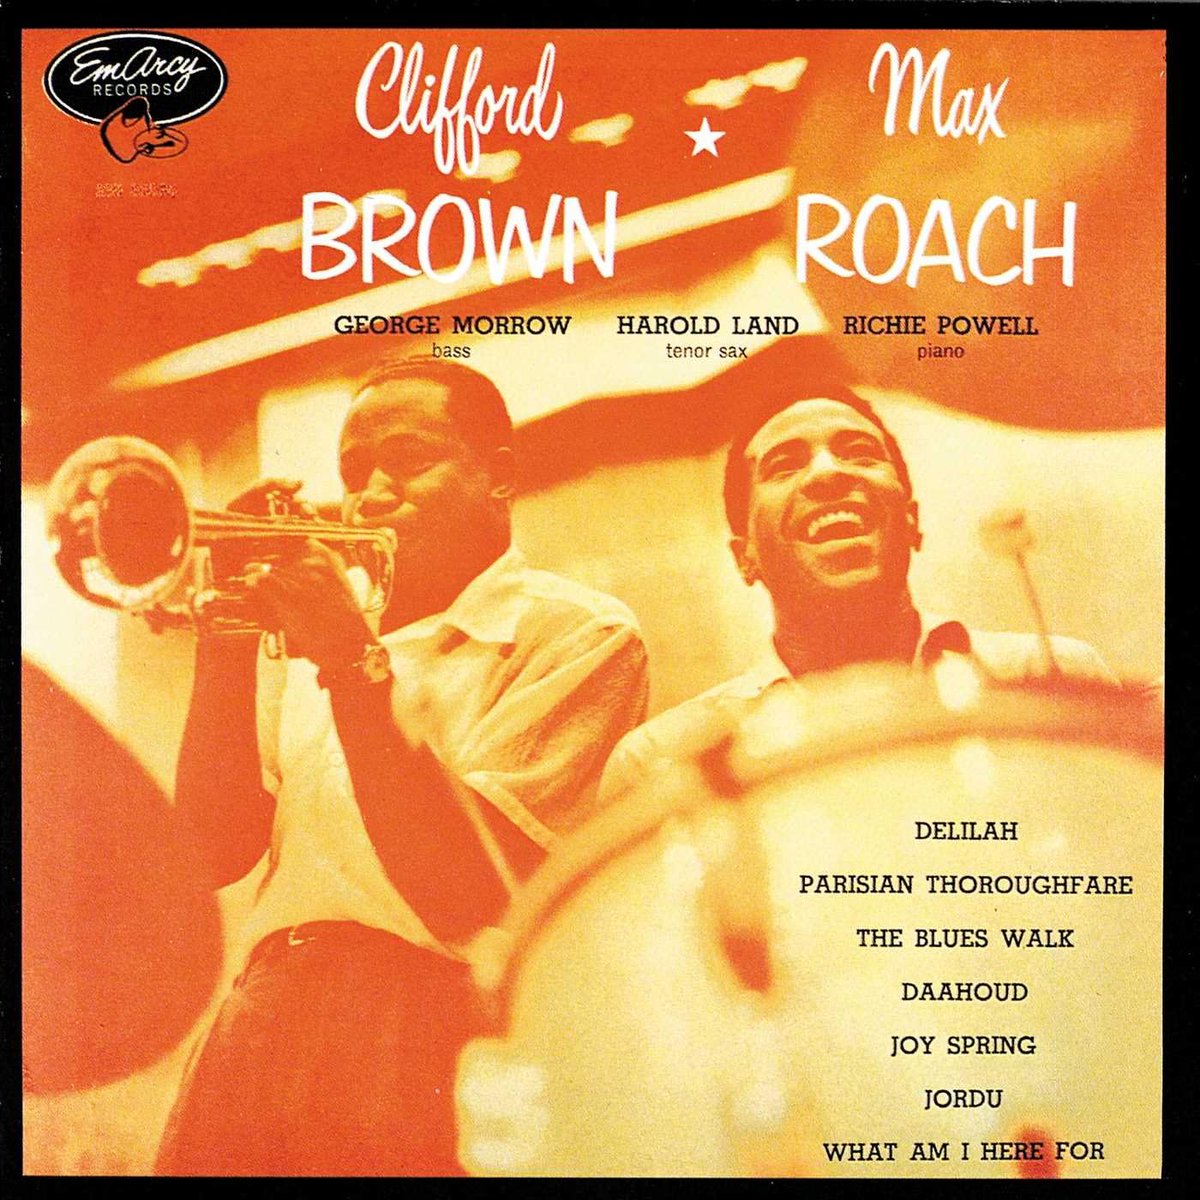 Happy birthday to Clifford Brown! This album is pure joy from beginning till end.

Clifford Benjamin Brown  was an American jazz trumpeter and composer. He died at the age of 25 in a car crash, leaving behind four years worth of recordings.

#CliffordBrown #MaxRoach #Jazz